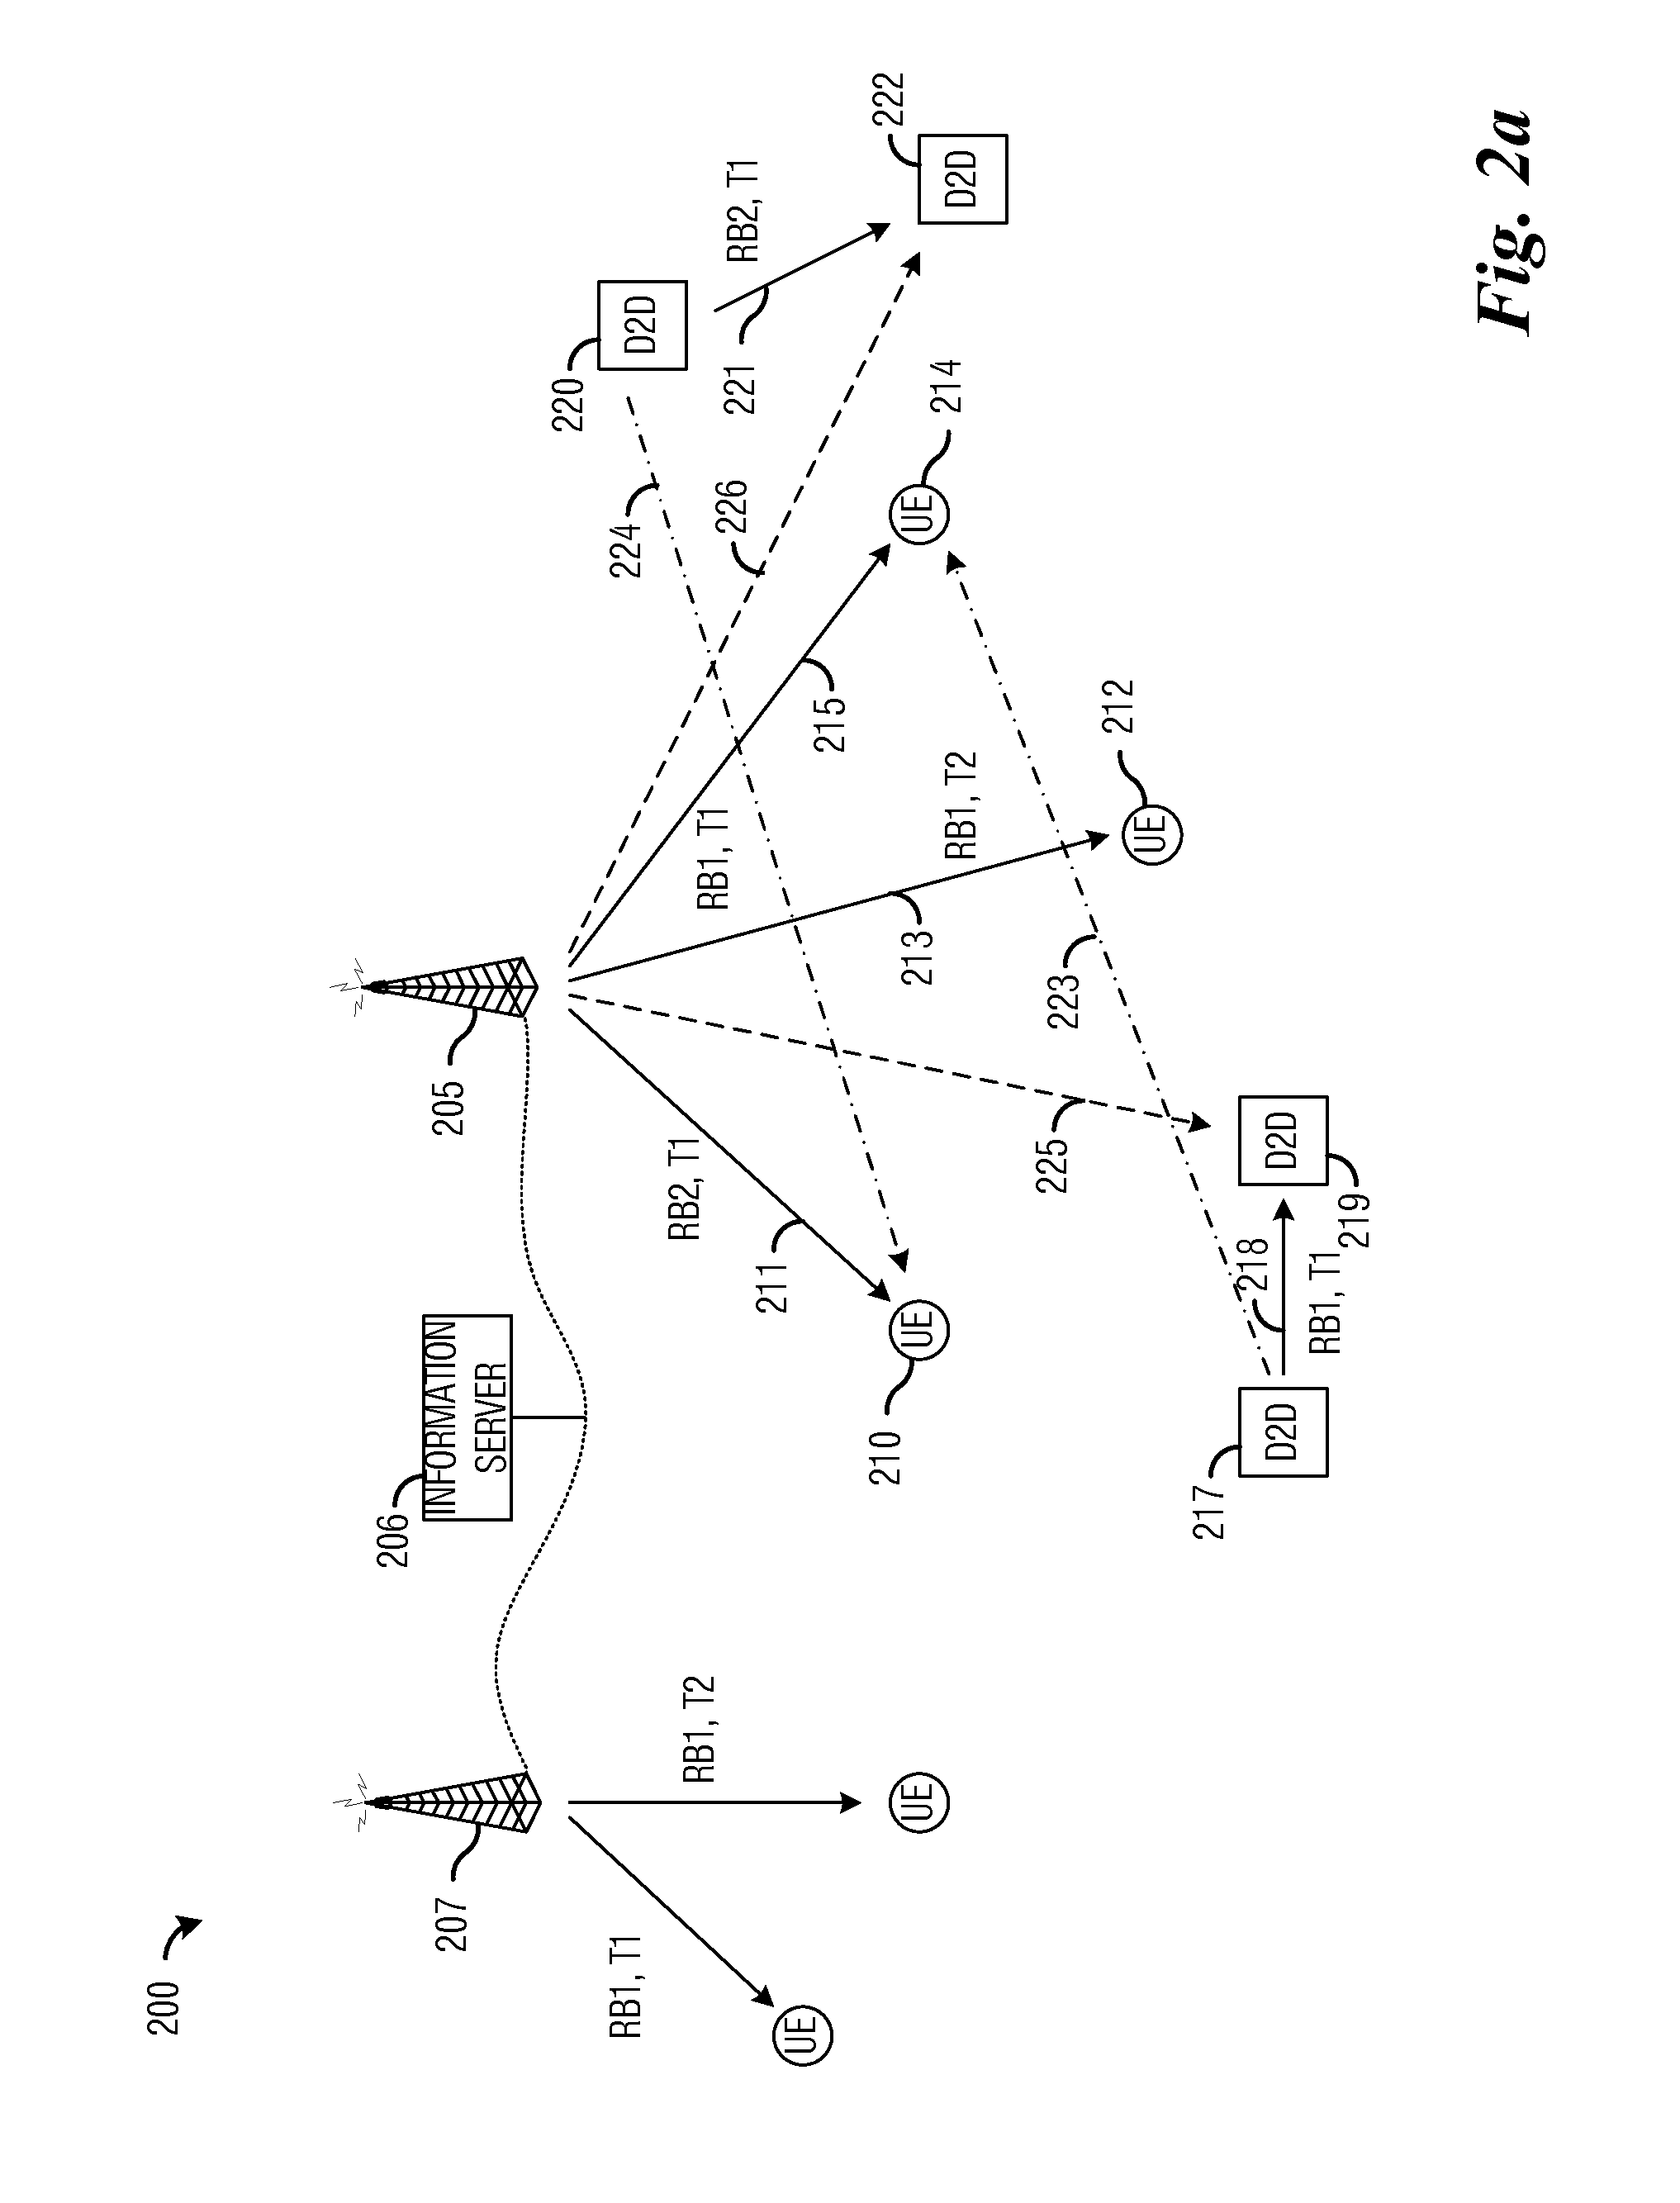 System and Method for Device-to-Device Operation in a Cellular Communications System